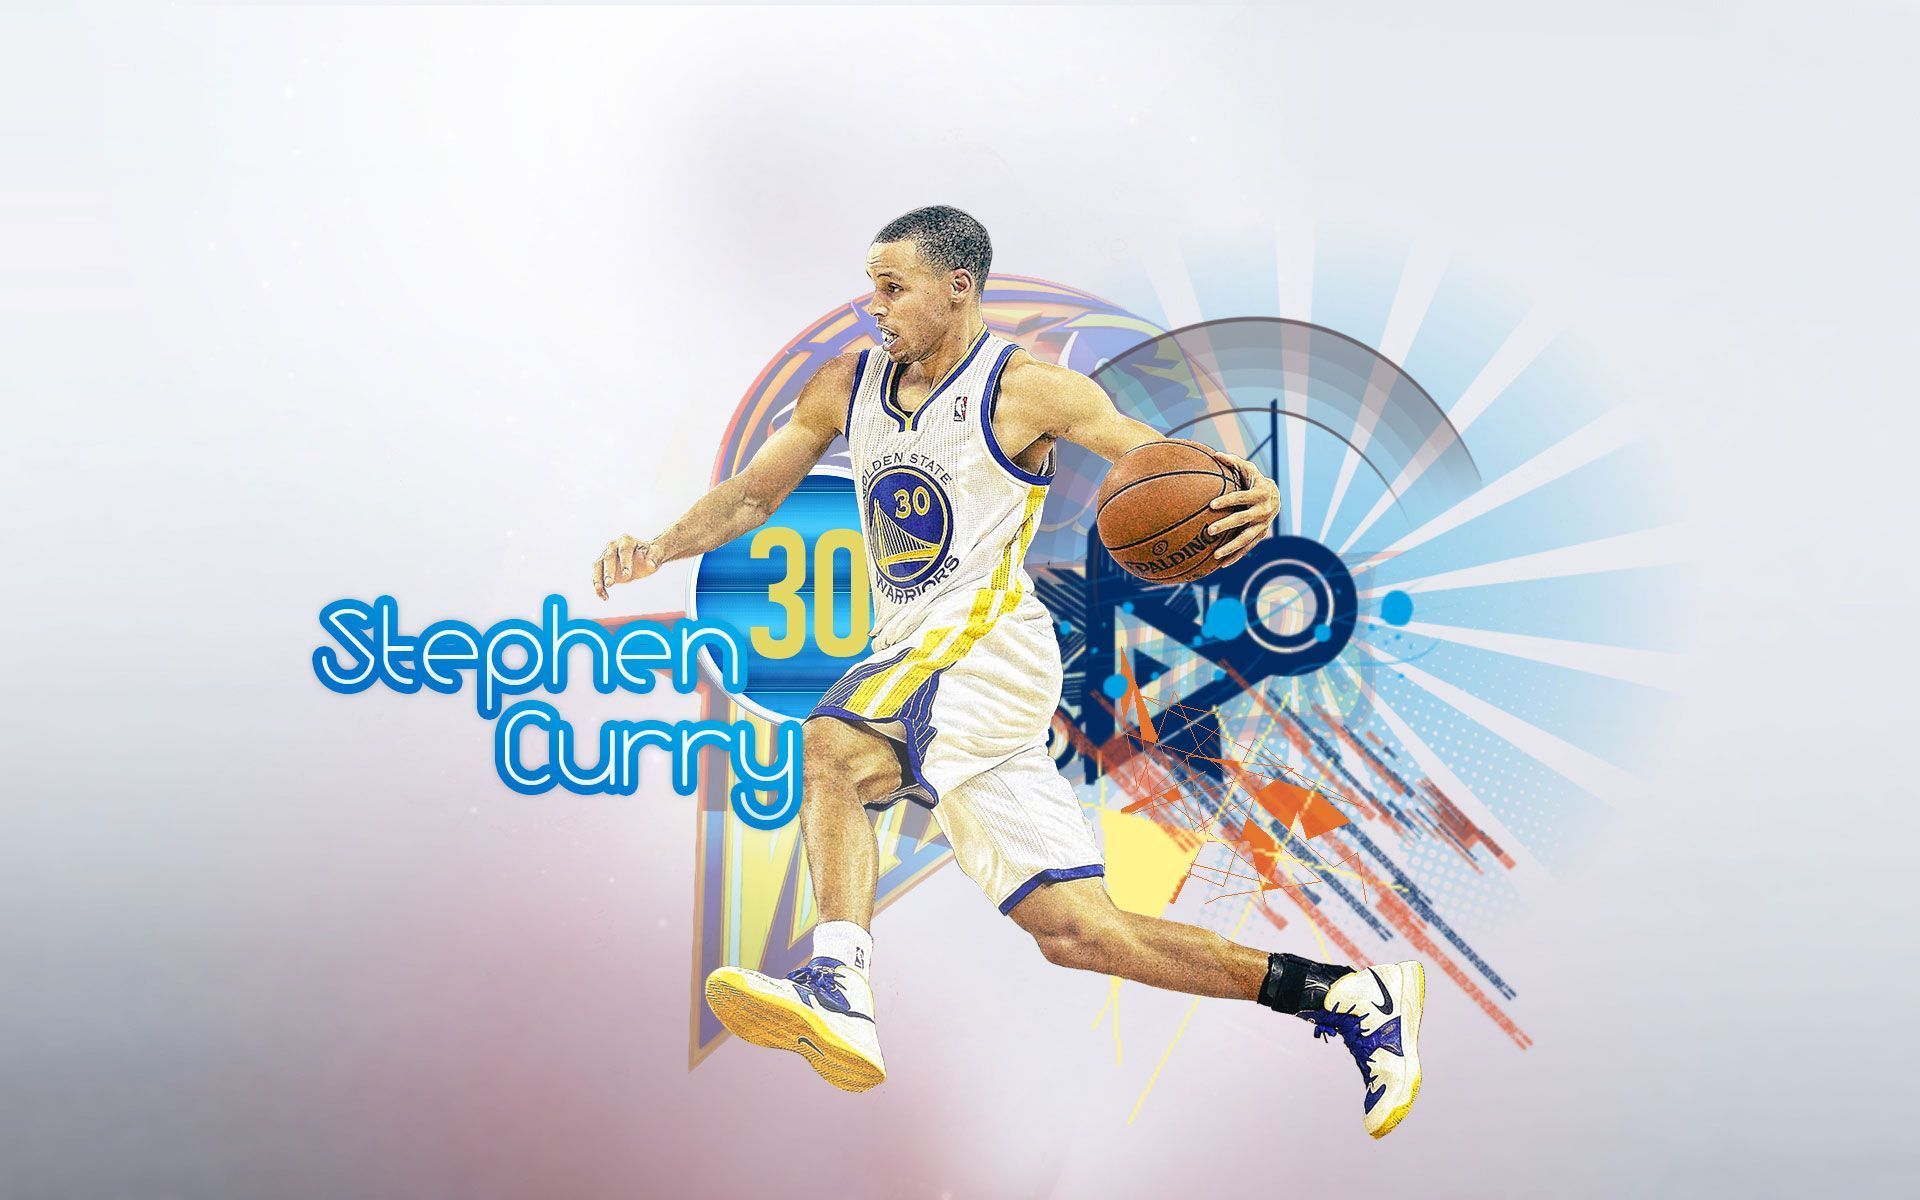 Stephen Curry wallpaper free download Wallpapers, Backgrounds